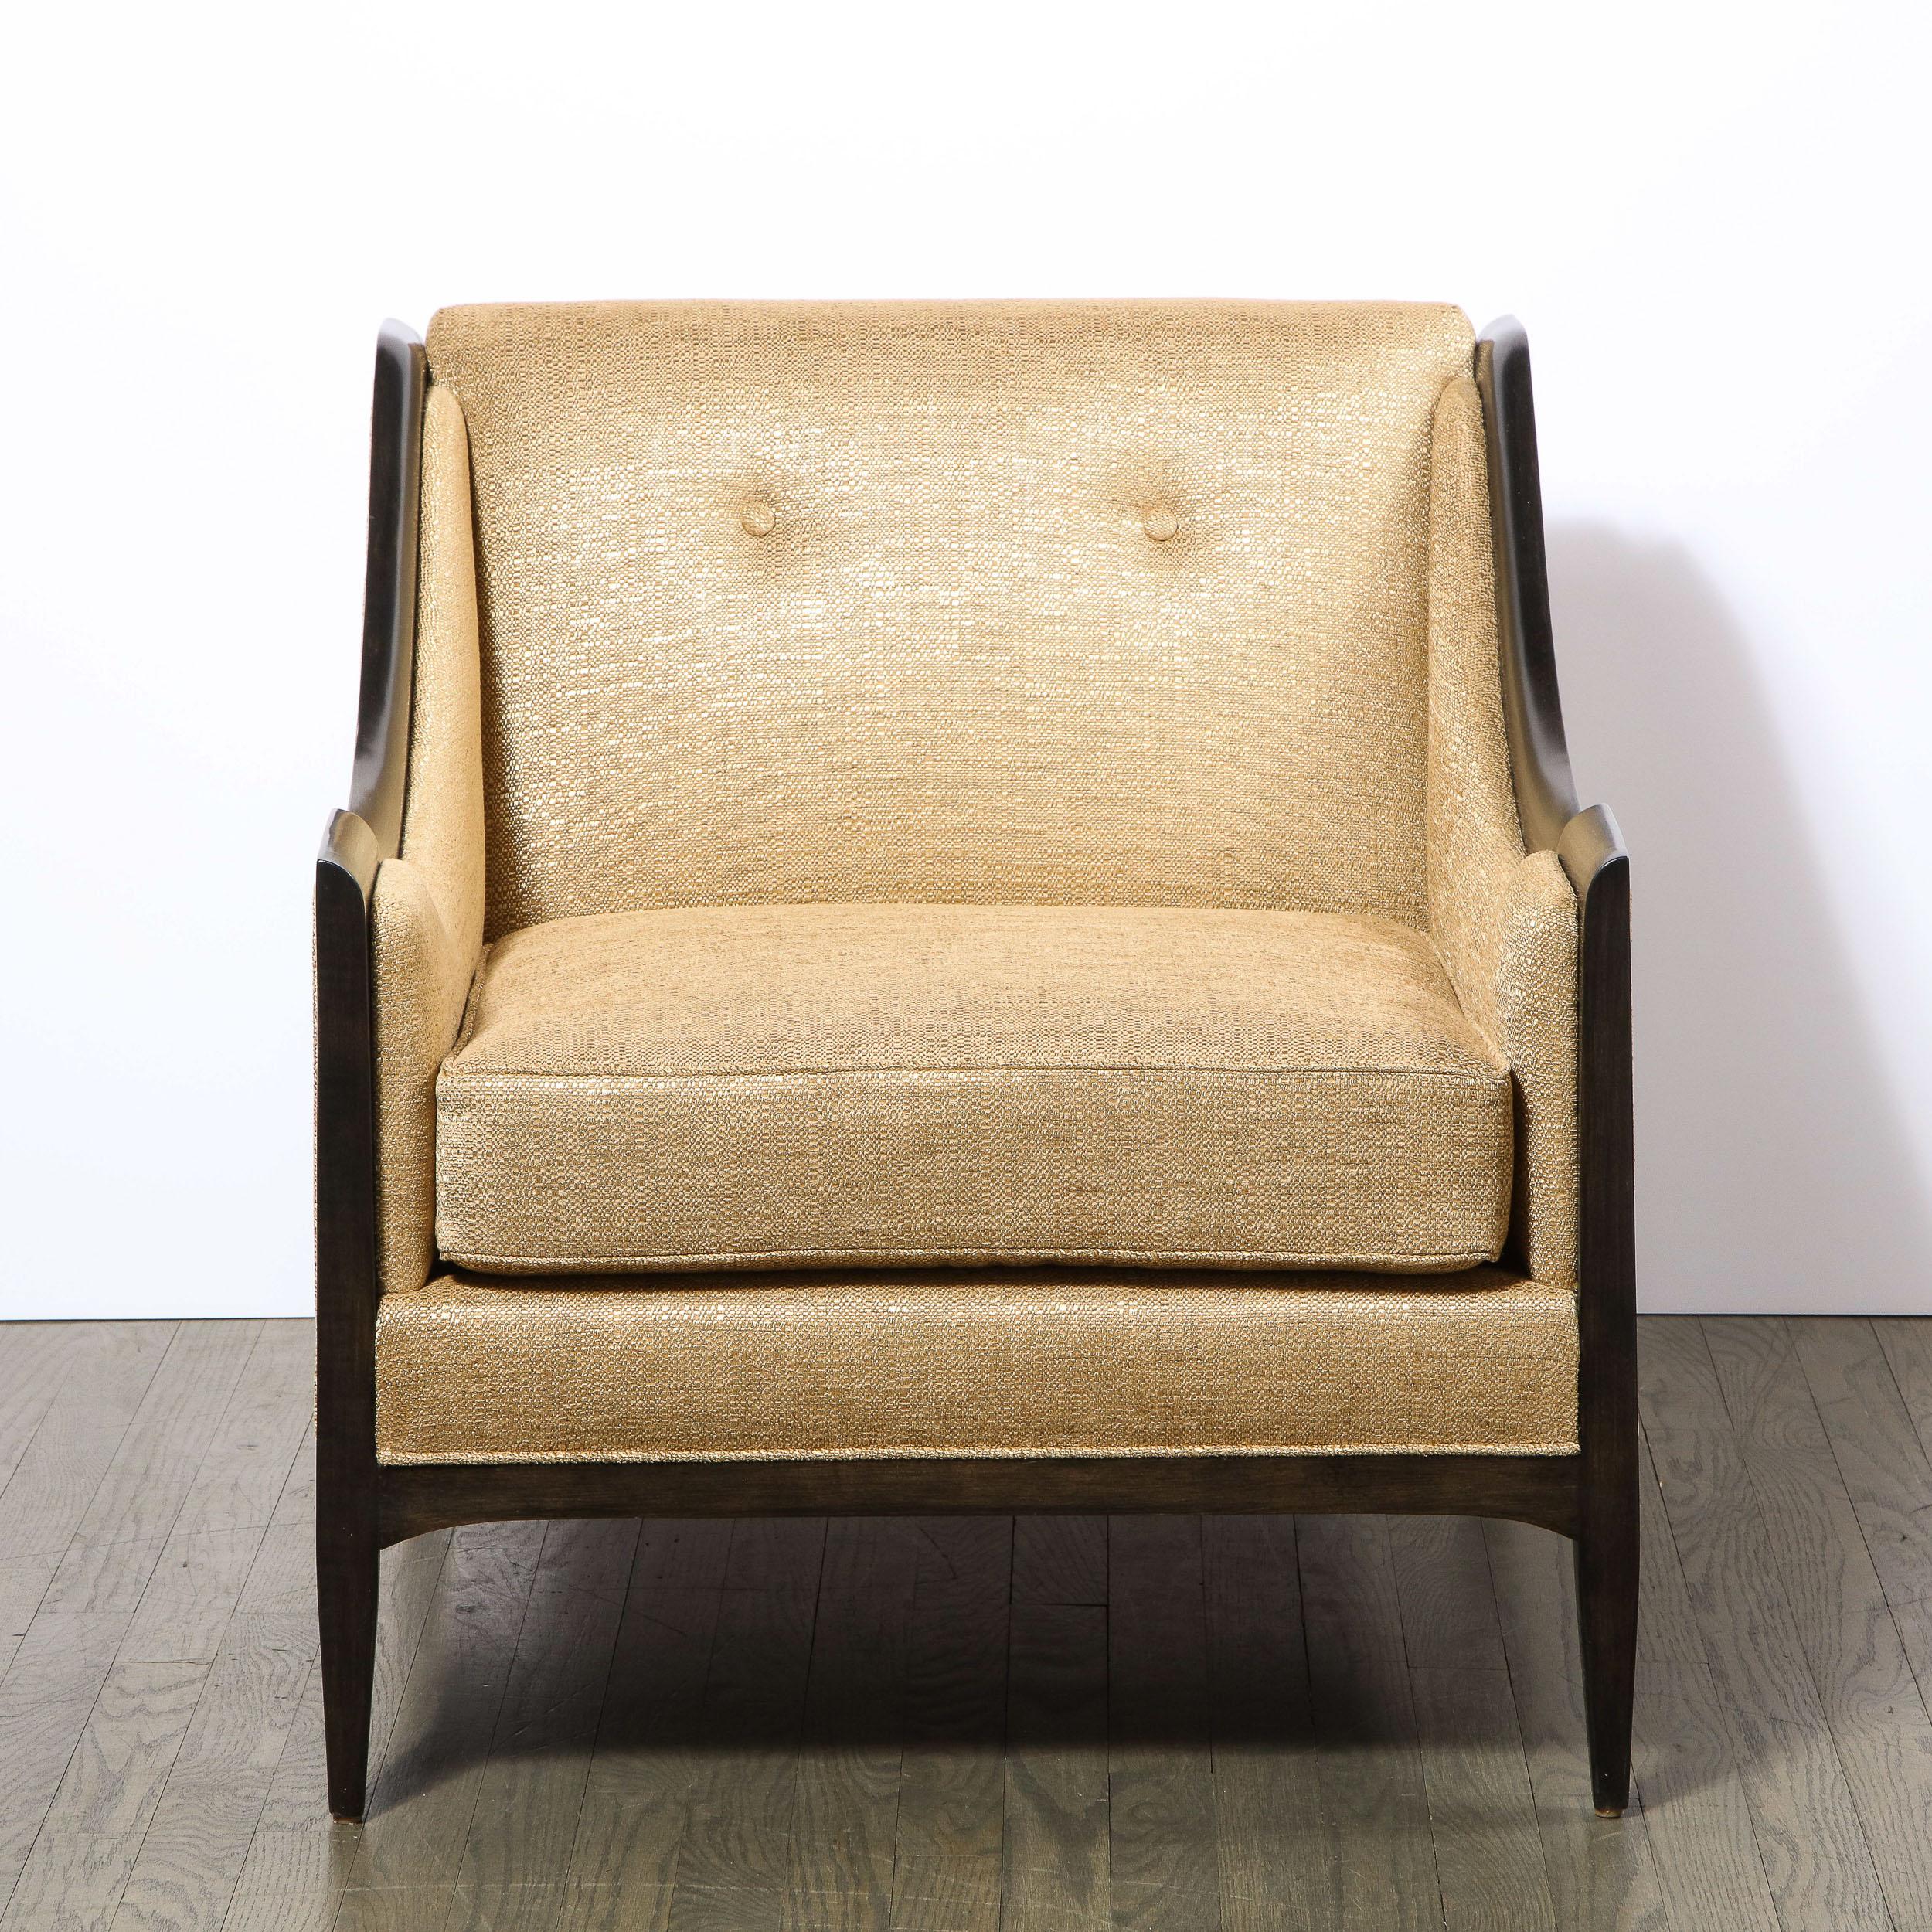 This elegant pair of Mid-Century Modern club chairs were realized in the United States circa 1960. They offer arched hind legs; tapered cylindrical front legs; a square back; scalloped sides framed in hand rubbed ebonized walnut. Additionally, they